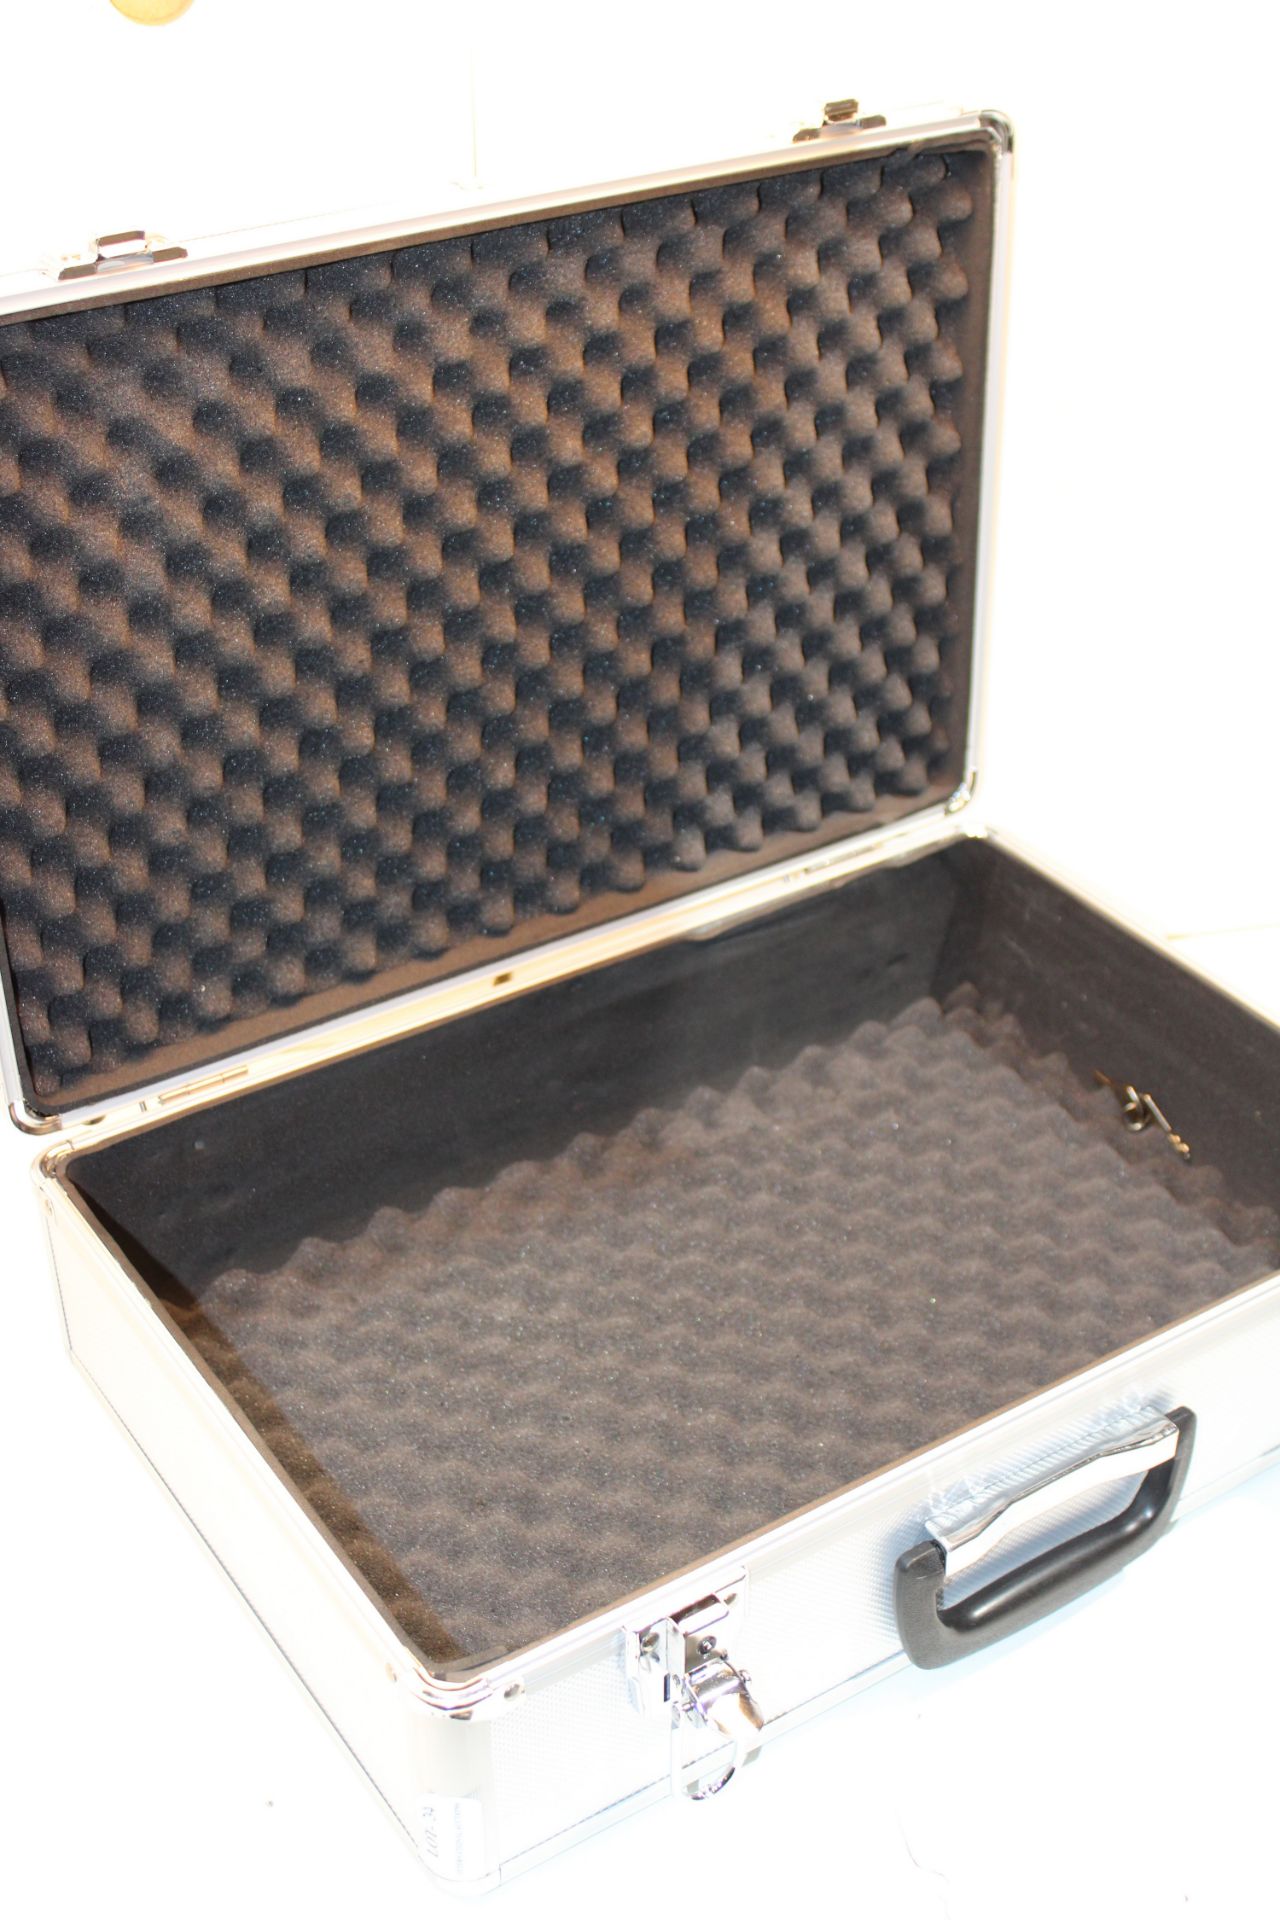 UNBOXED FLIGHT CASE Condition Report Appraisal Available on Request- All Items are Unchecked/